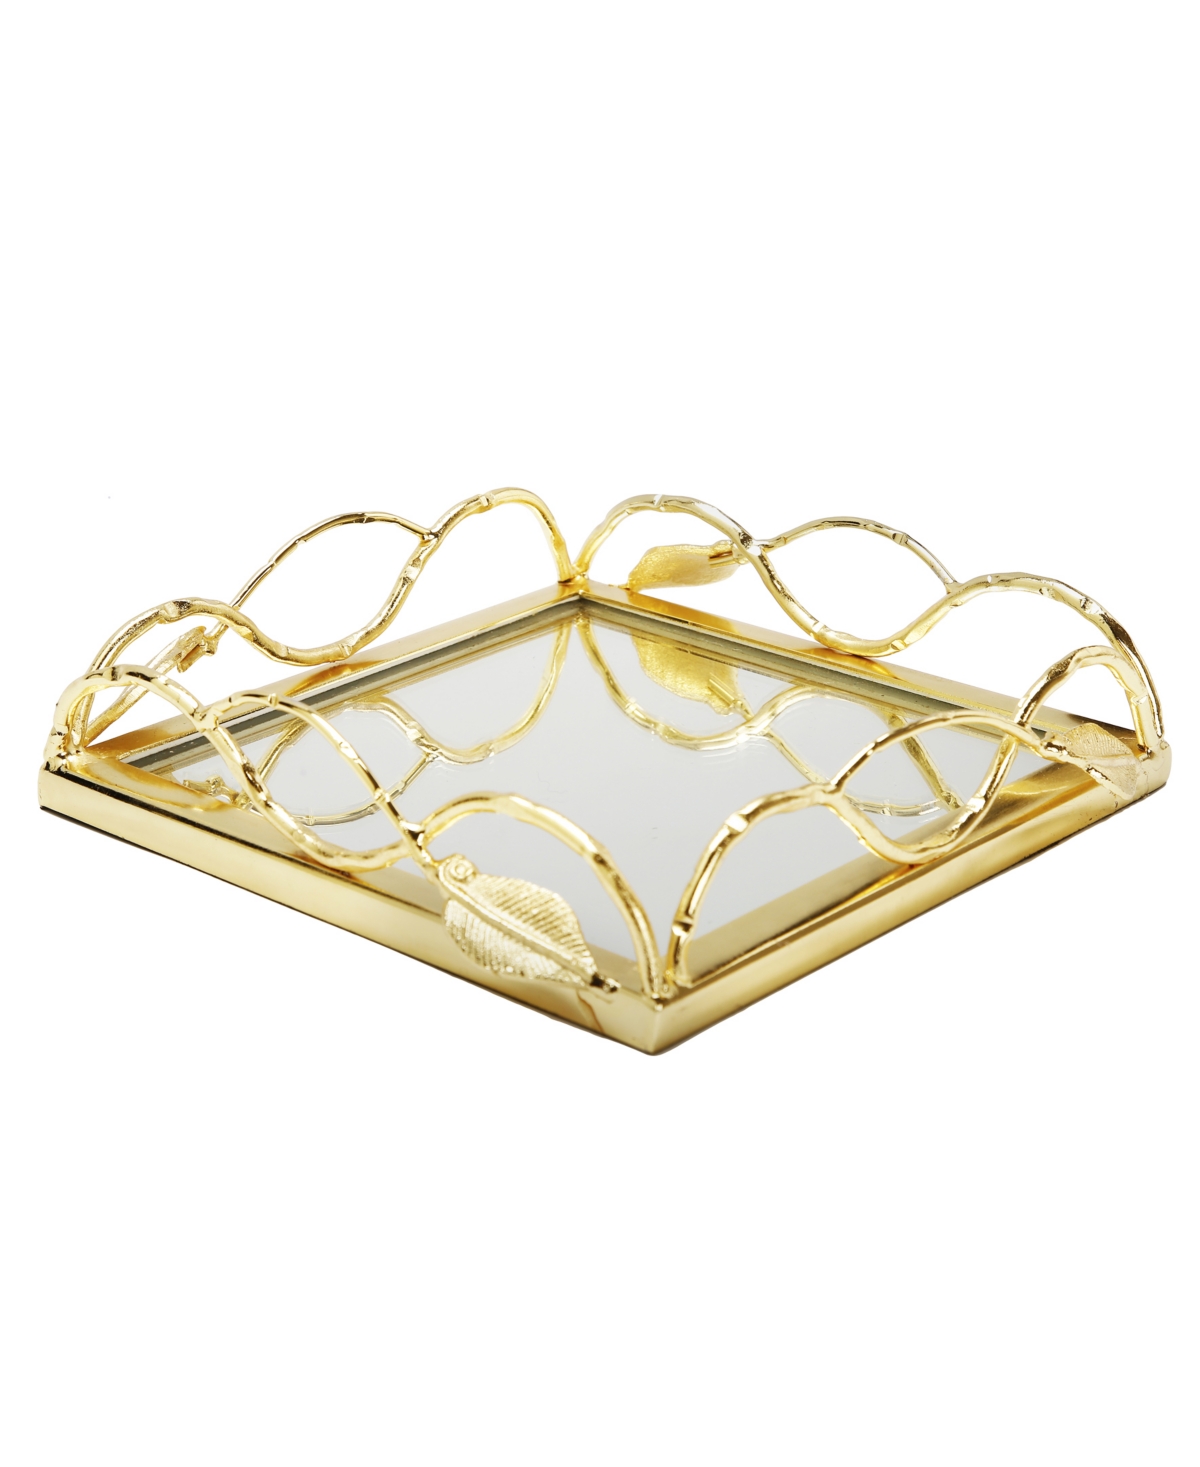 Classic Touch Mirror Napkin Holder With Leaf Design In Gold-tone